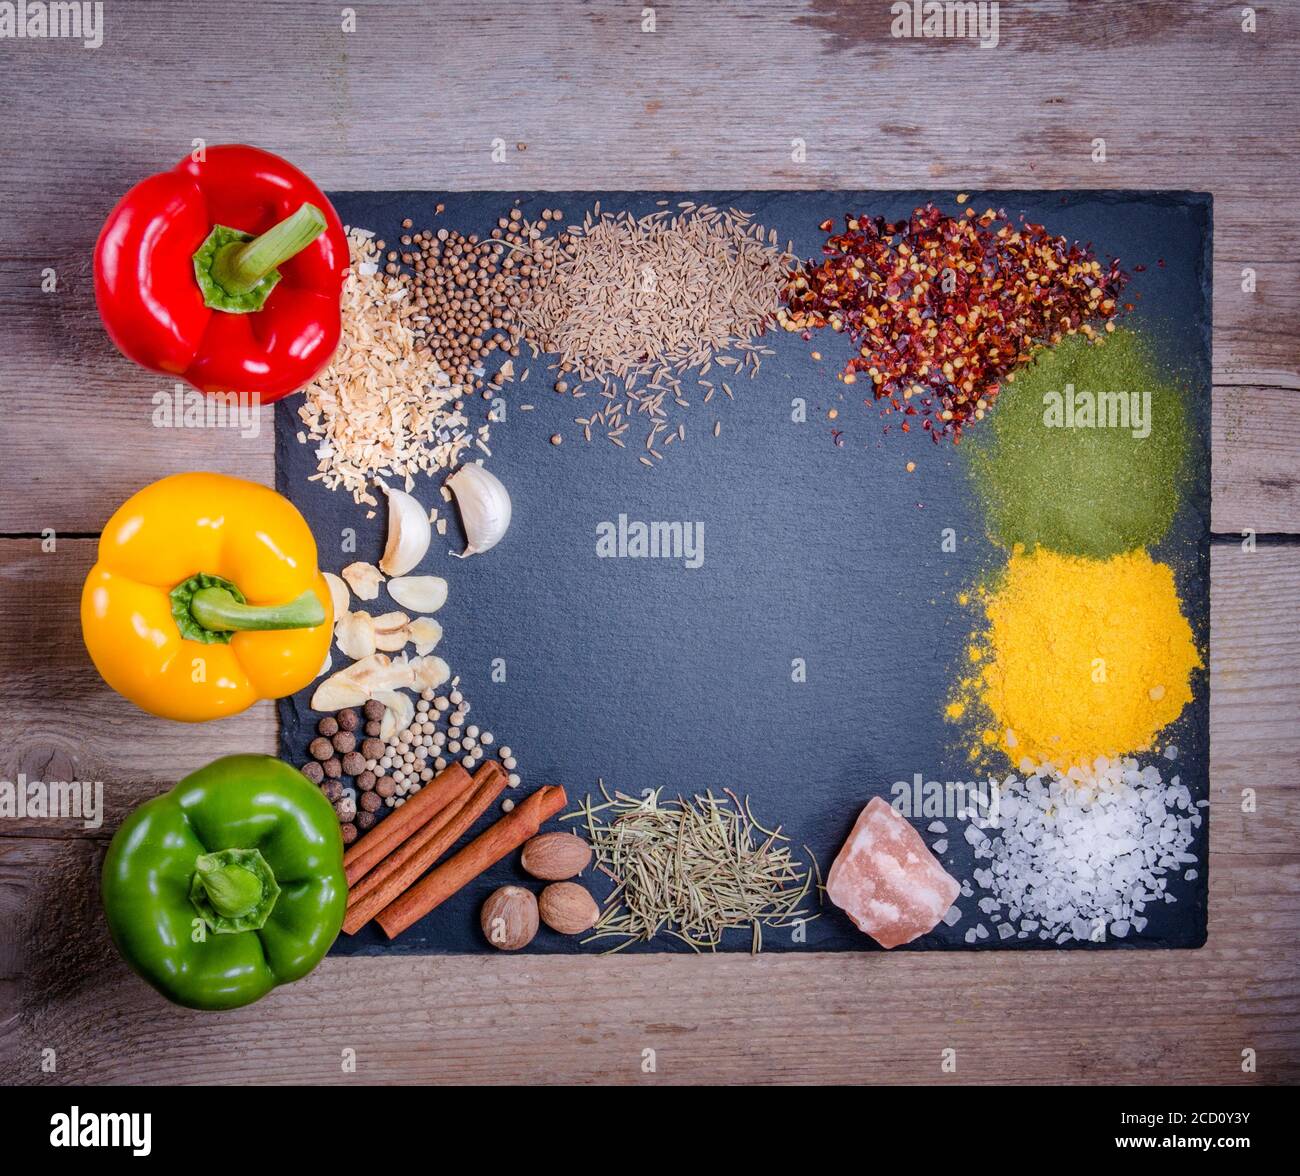 Spices, herbs and fresh pepper on slate tray on an old rustic table. Red, yellow and green fresh peppers. Top view. Rustic style. Fresh ingredients an Stock Photo